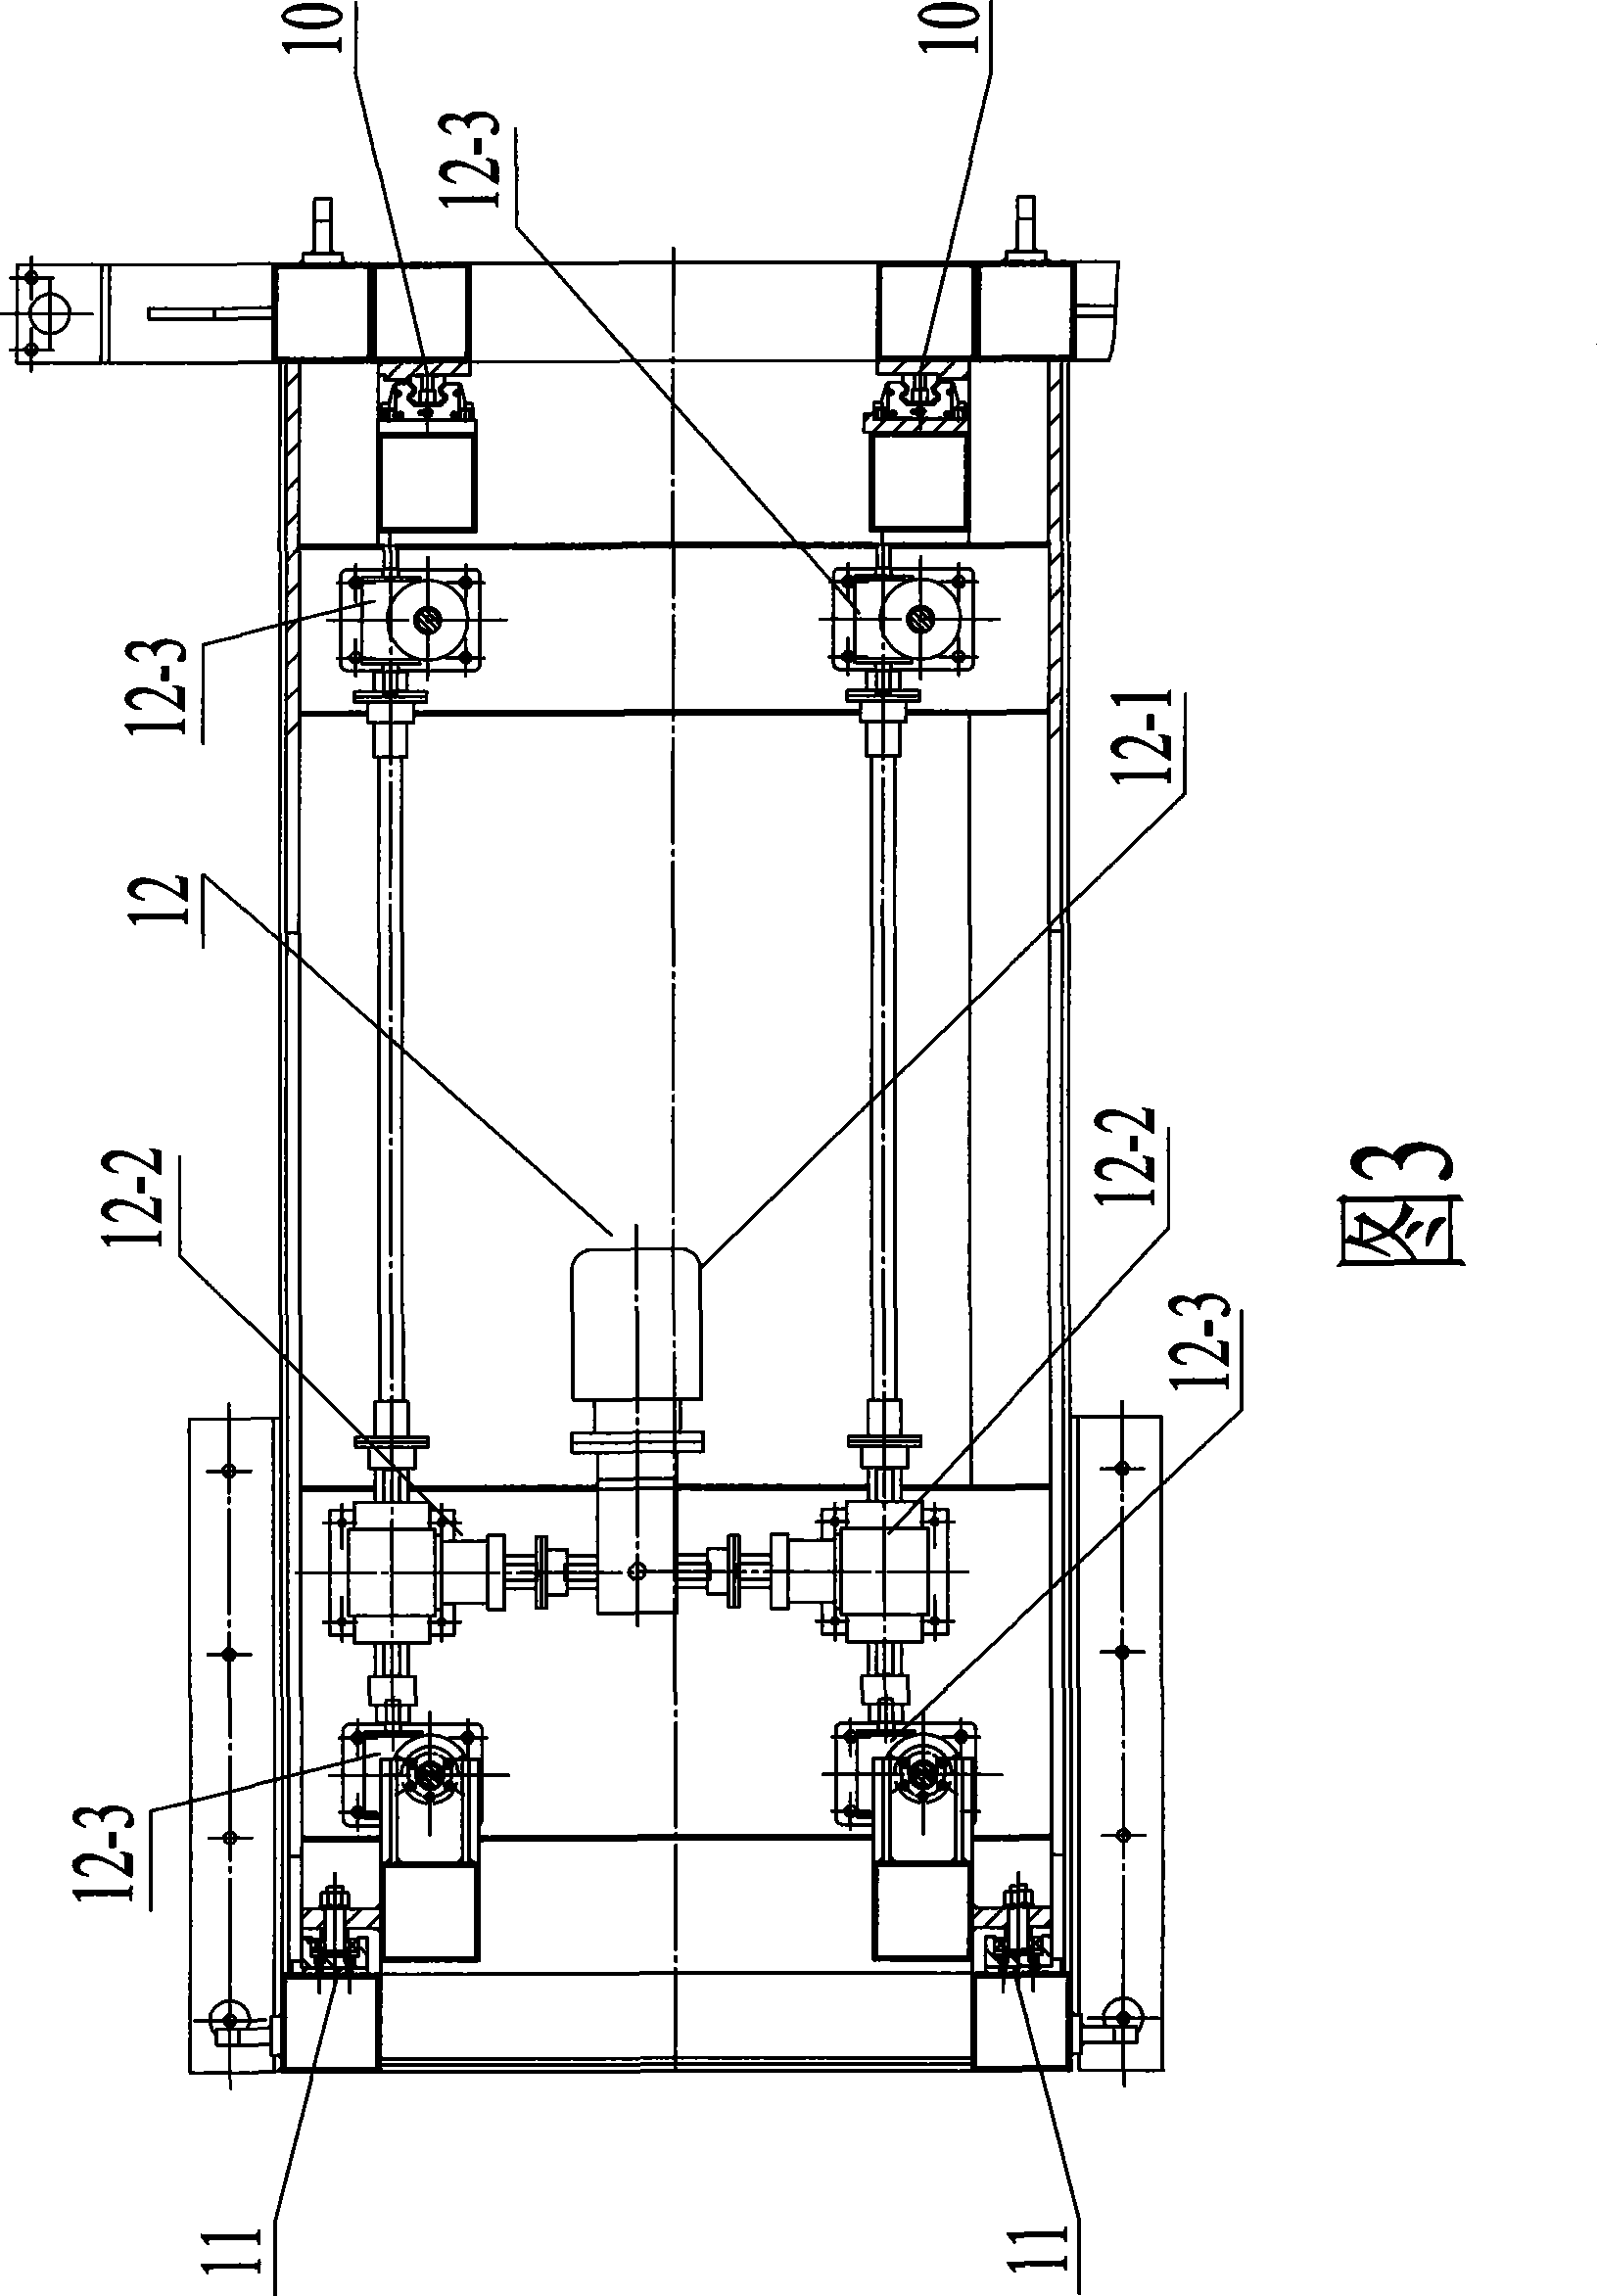 Tool conveying mechanical arm